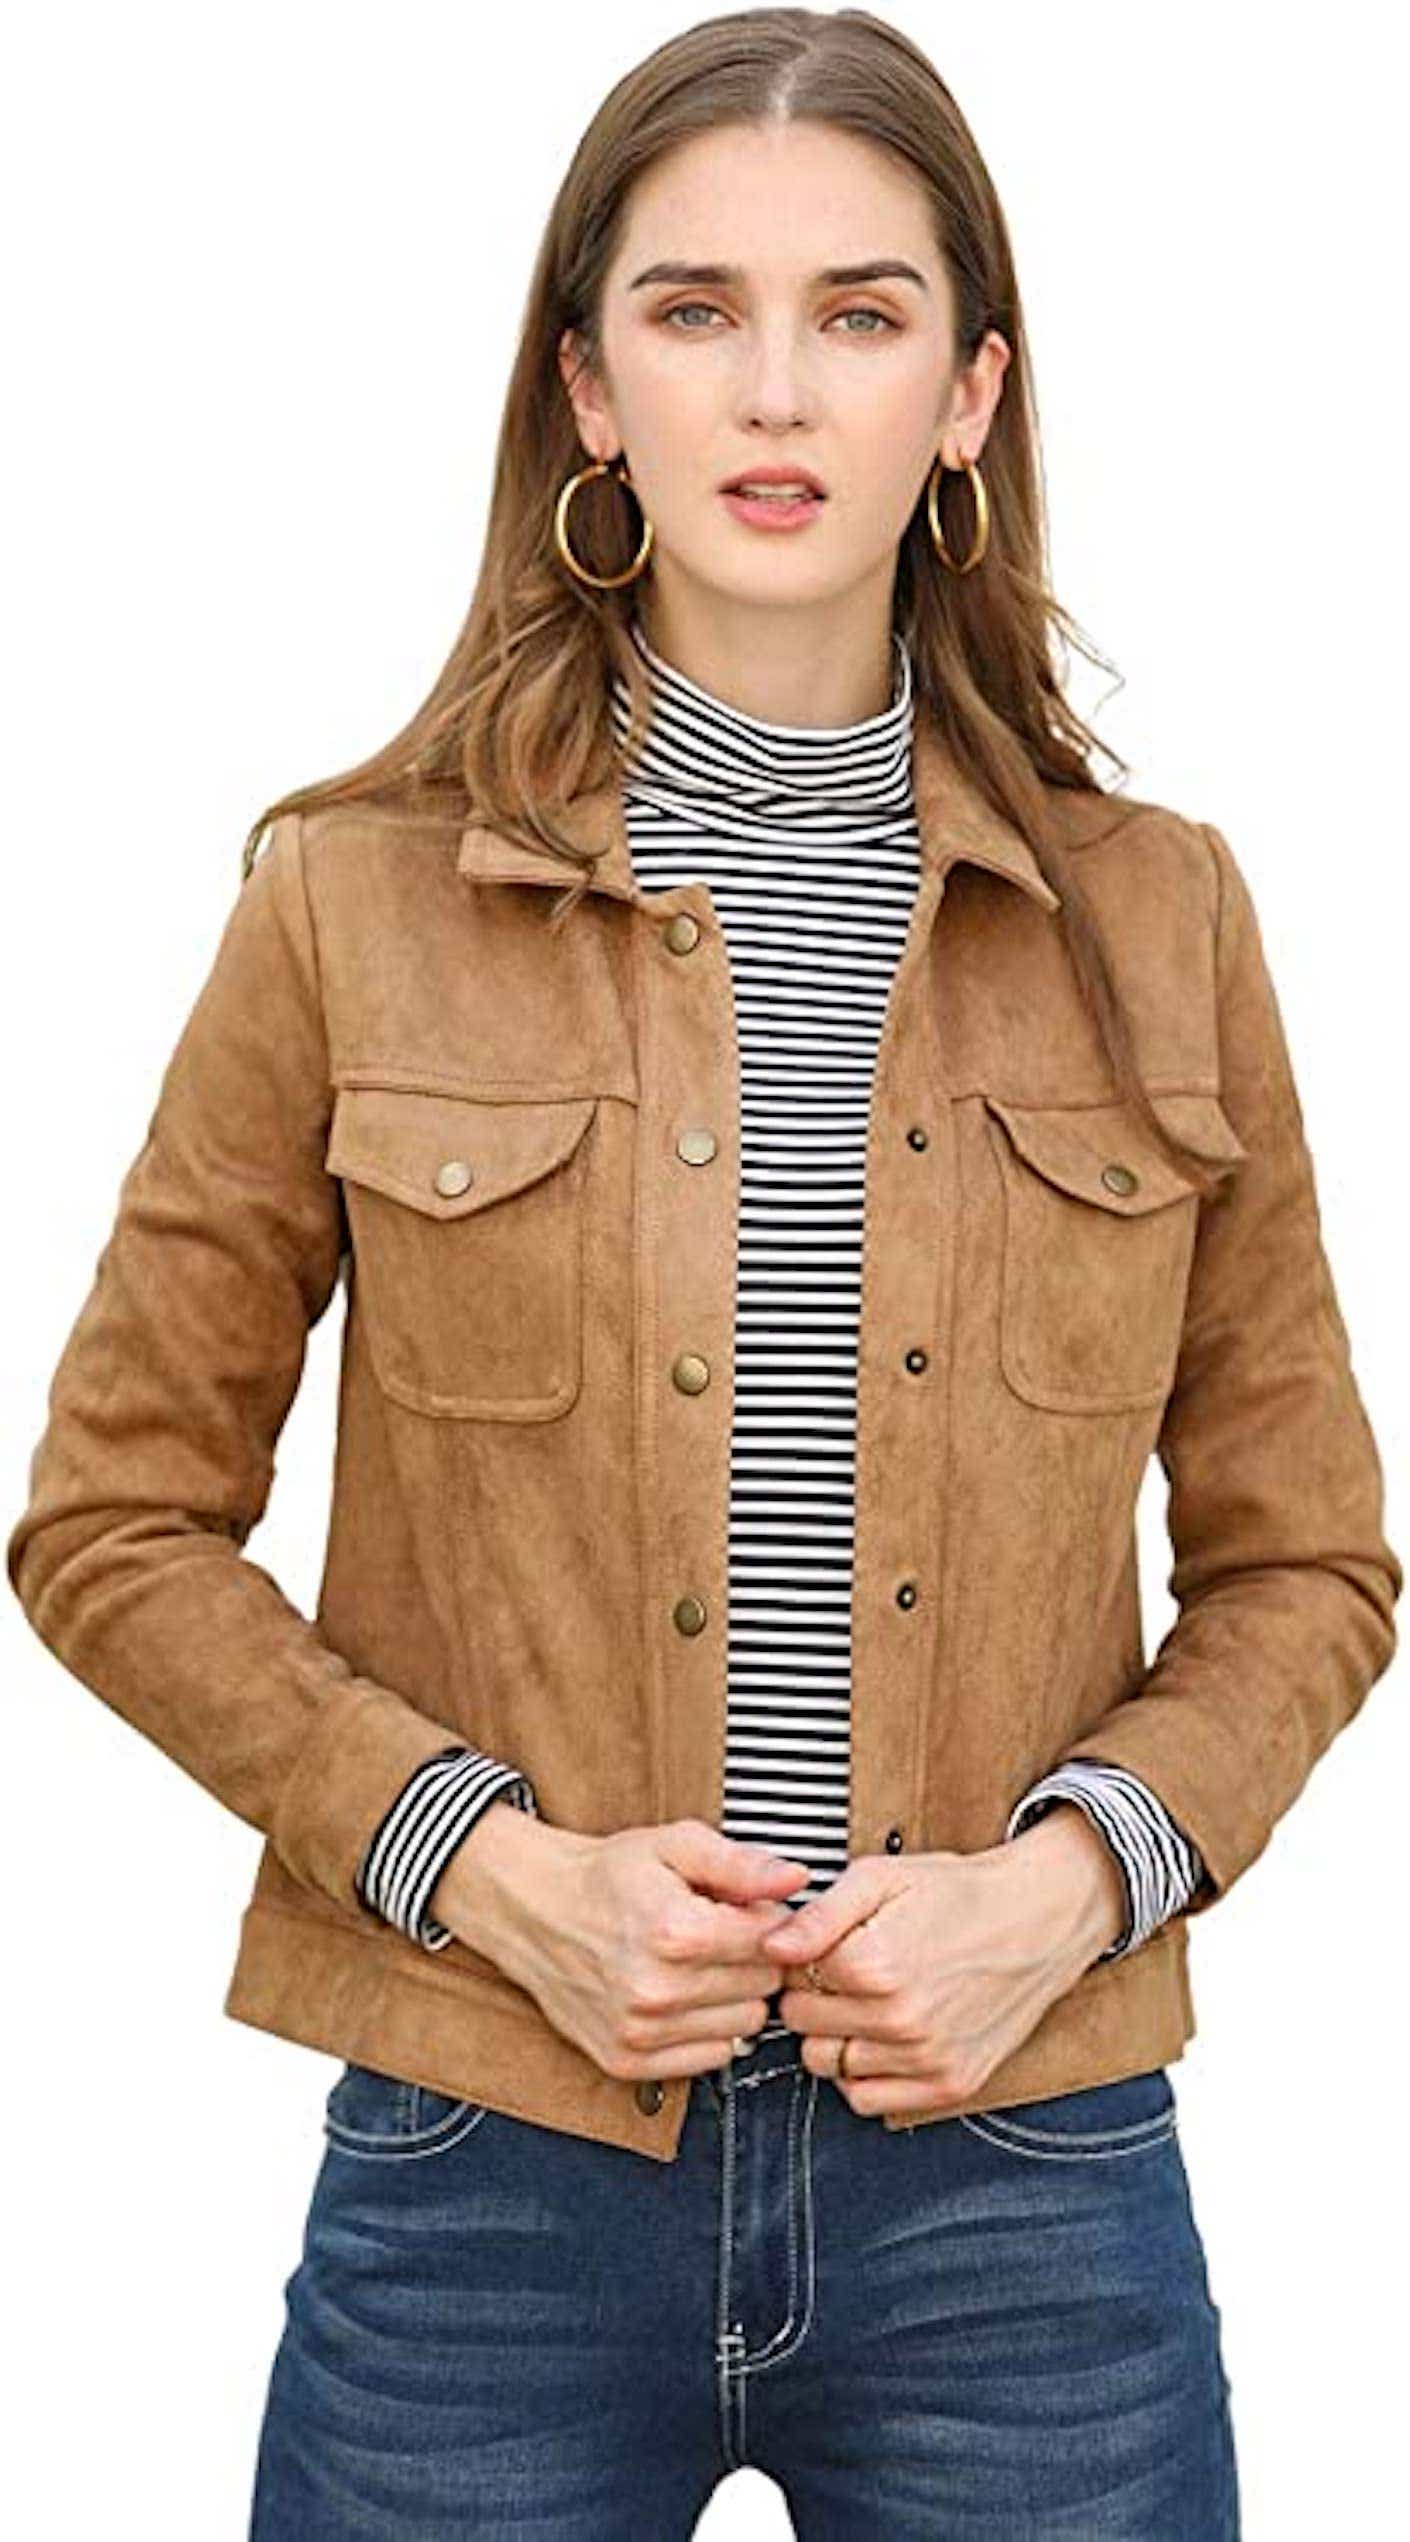 A woman wears a button down faux suede leather jacket that is fitted.